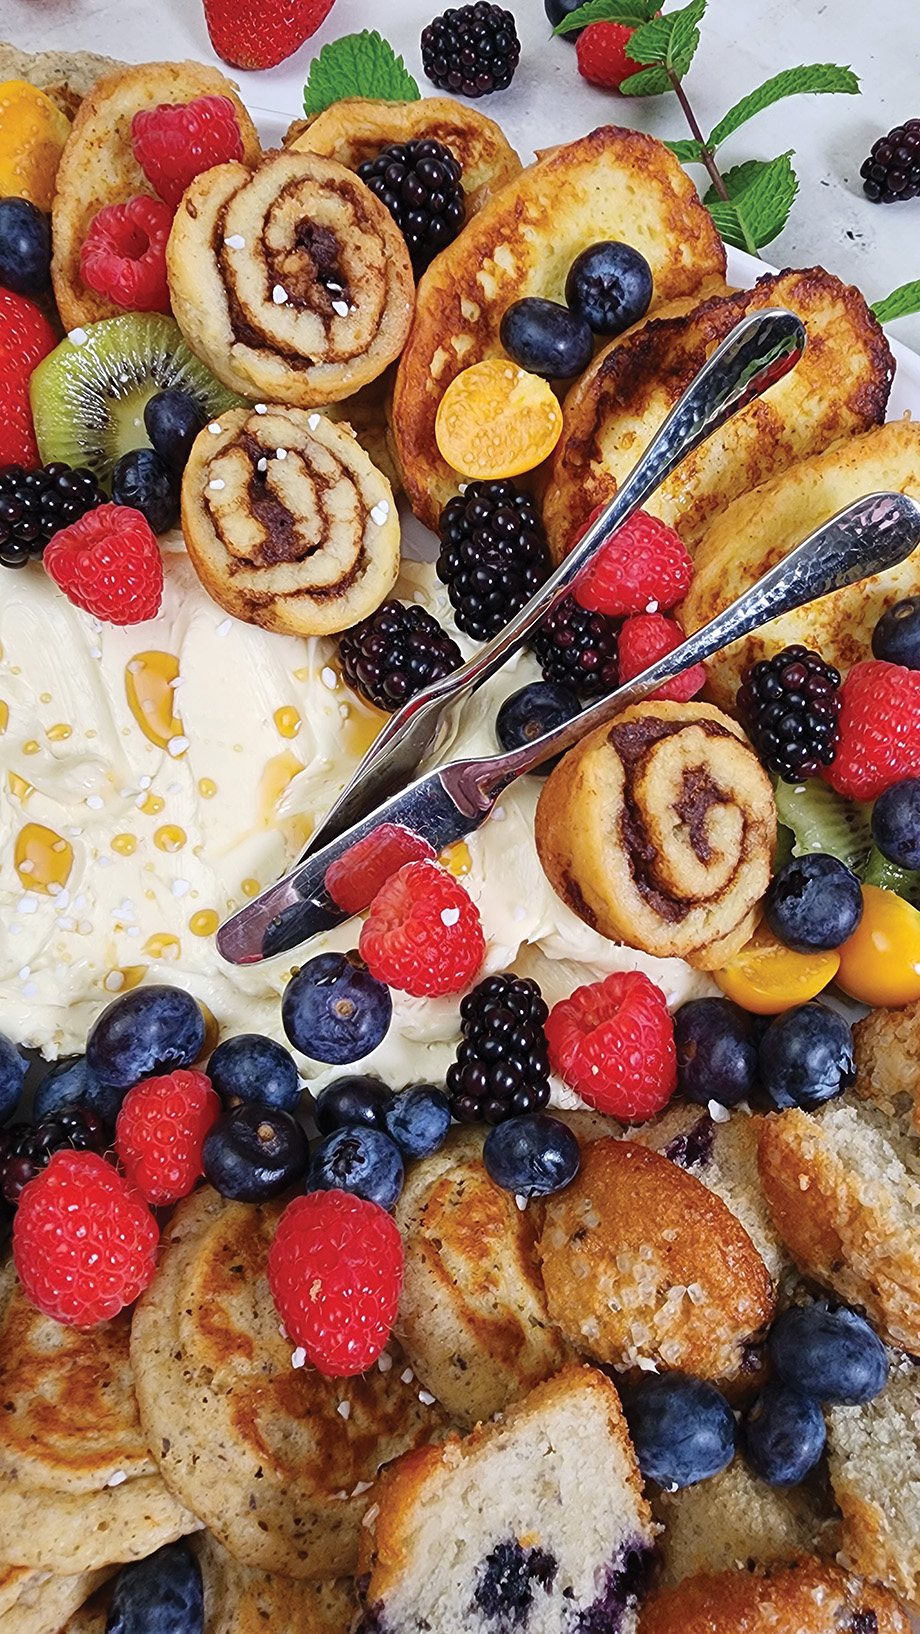 Breakfast boards replete with toasty offerings, a lineup of fruit and sweet cream butter dressed with maple syrup is our ideal way to start the day.